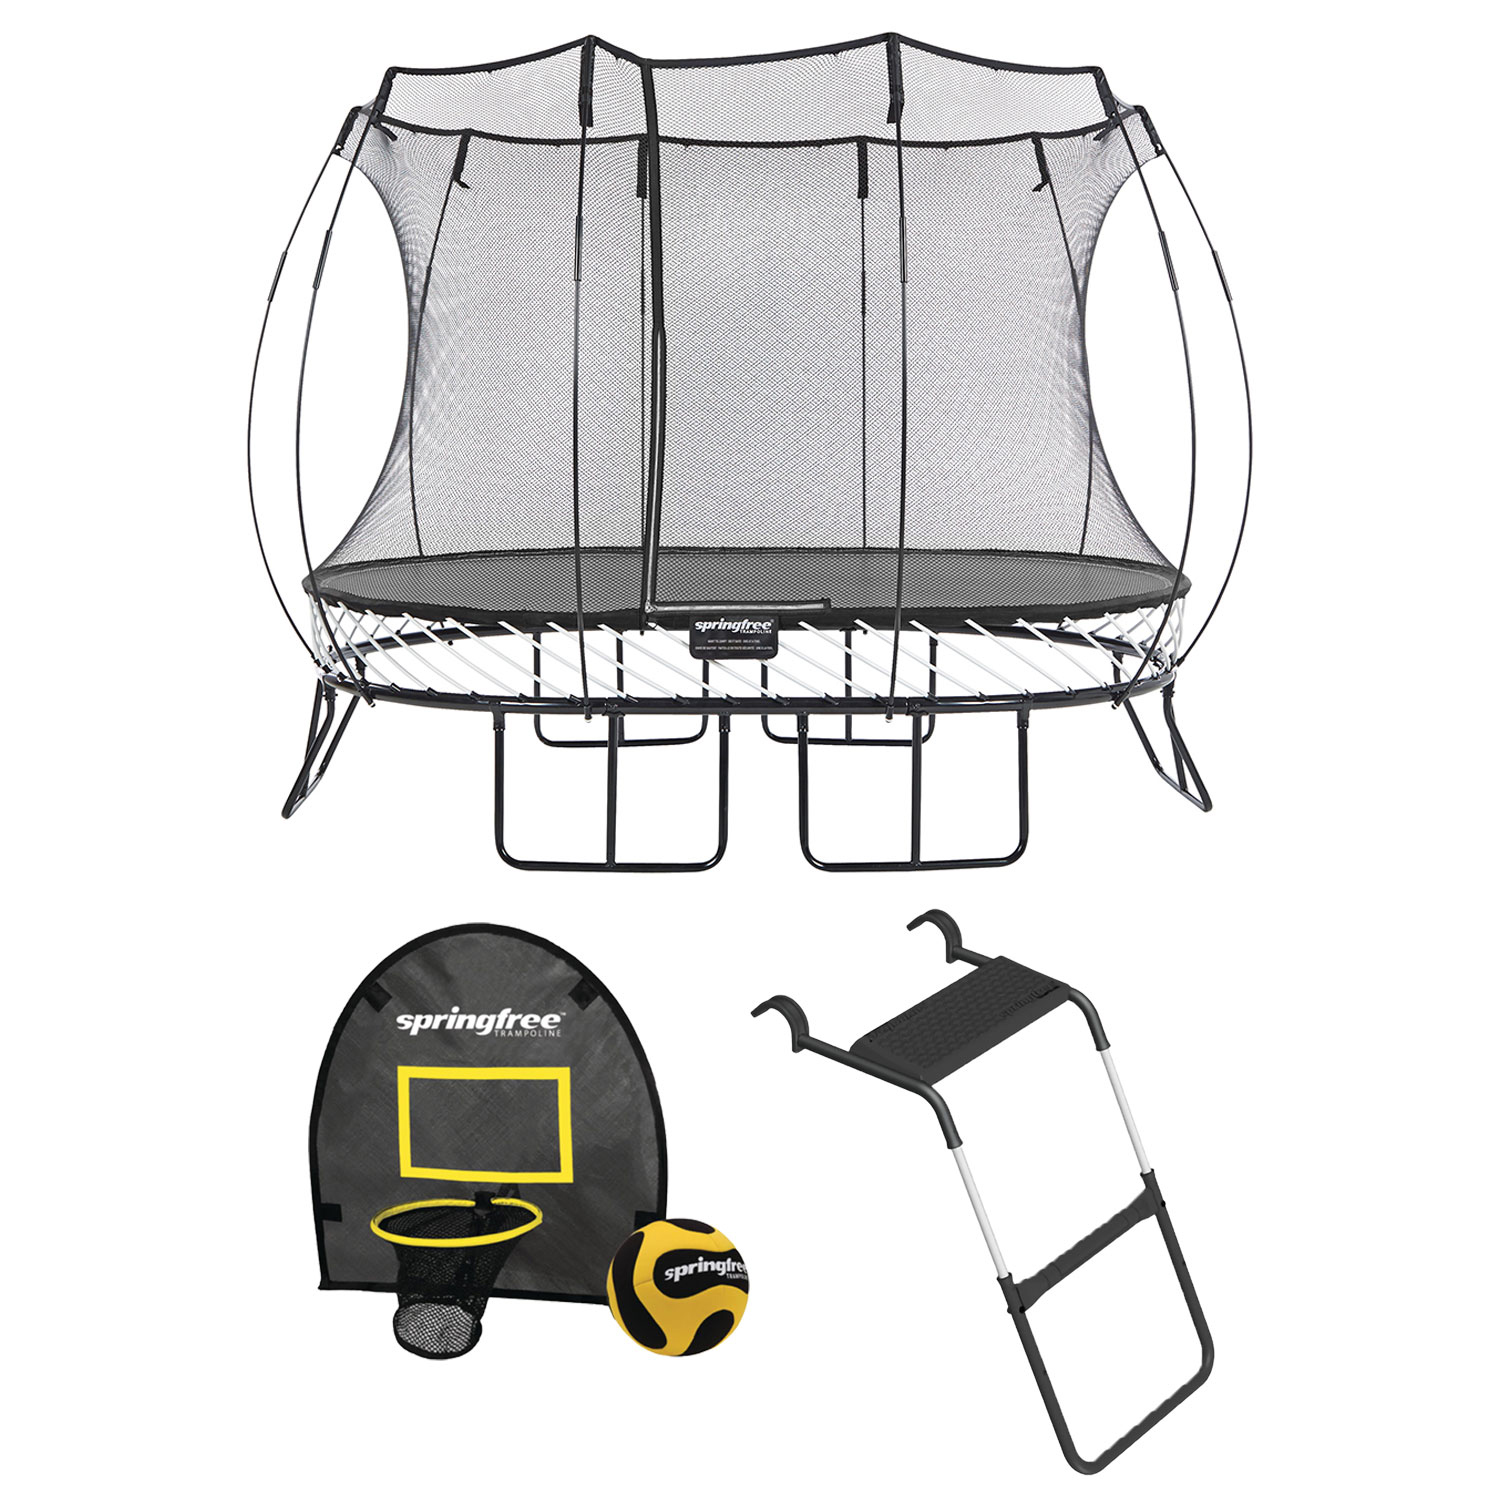 Springfree Outdoor 8 x 11 Ft Trampoline, Enclosure, Hoop Game, and Step Ladder - image 1 of 12